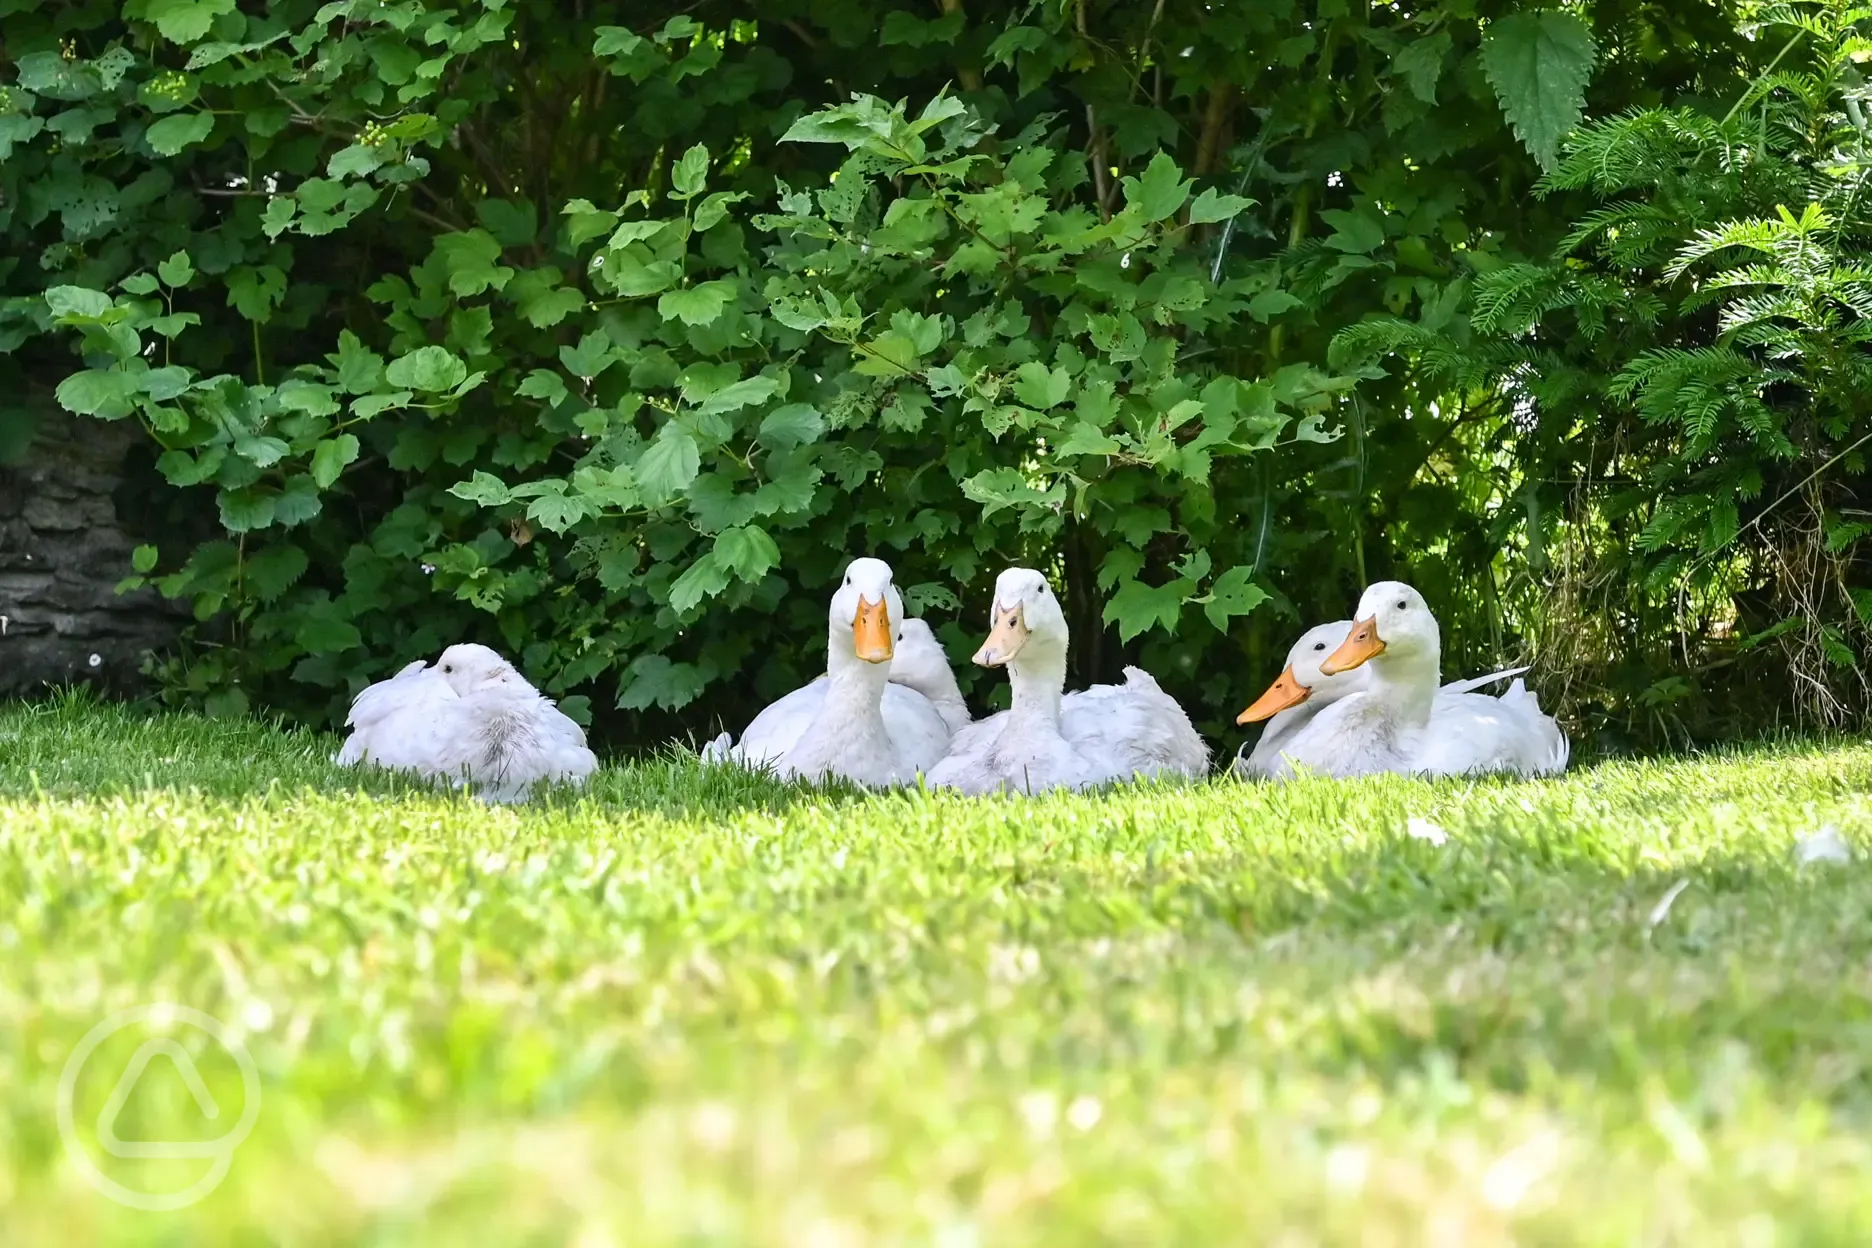 Free roaming ducks, chickens and peacocks will visit